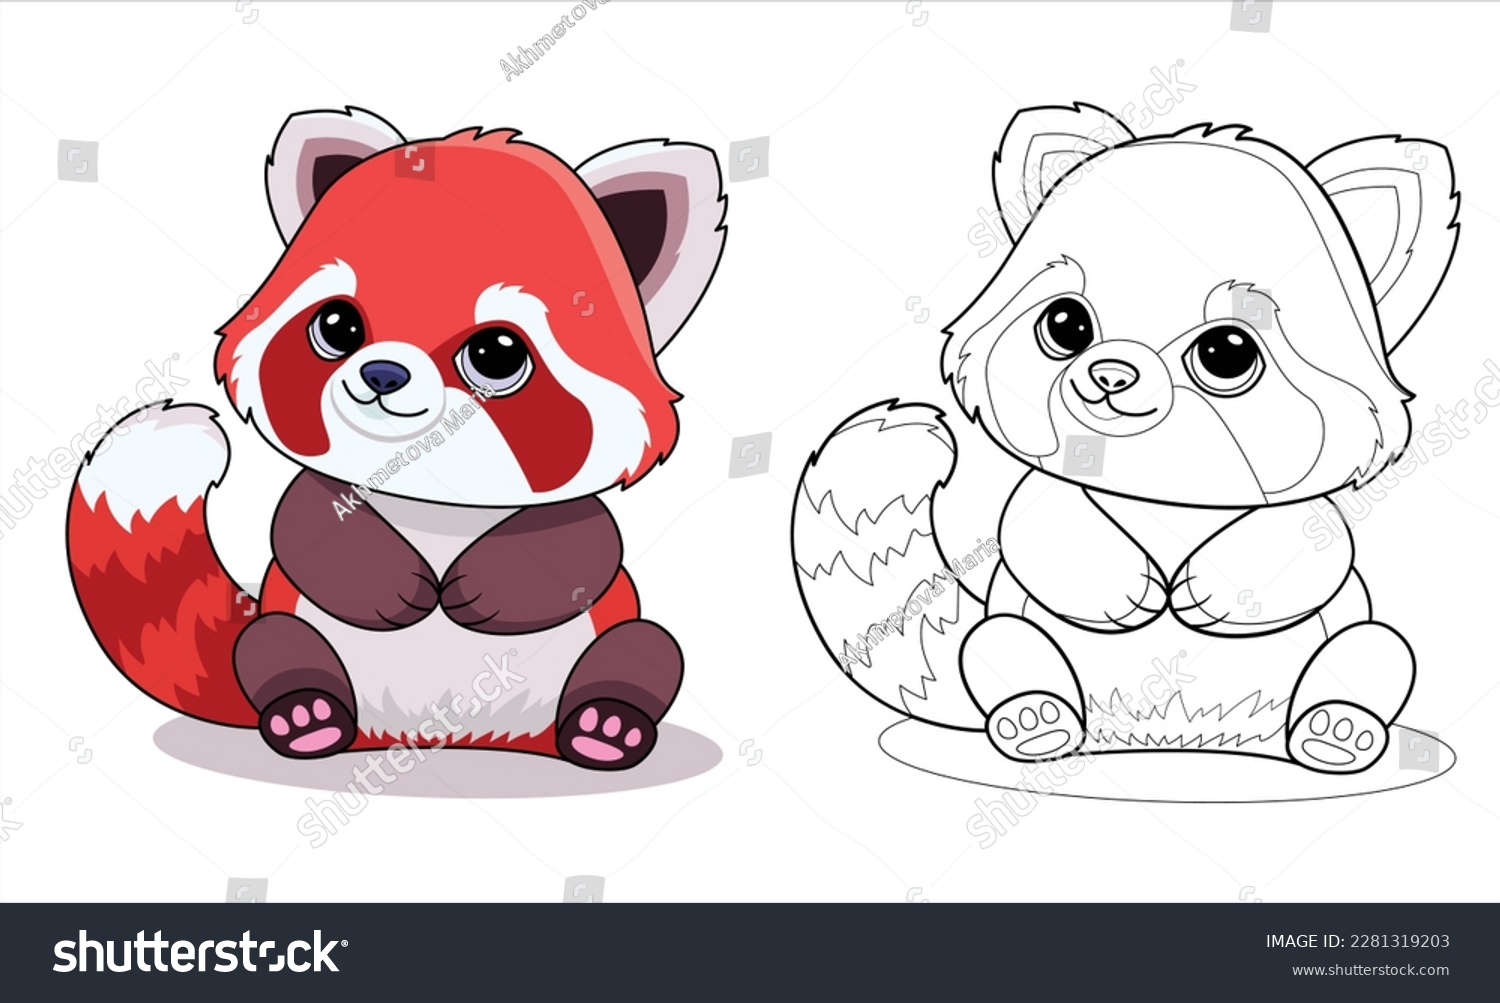 Red panda childrens coloring vector stock vector royalty free